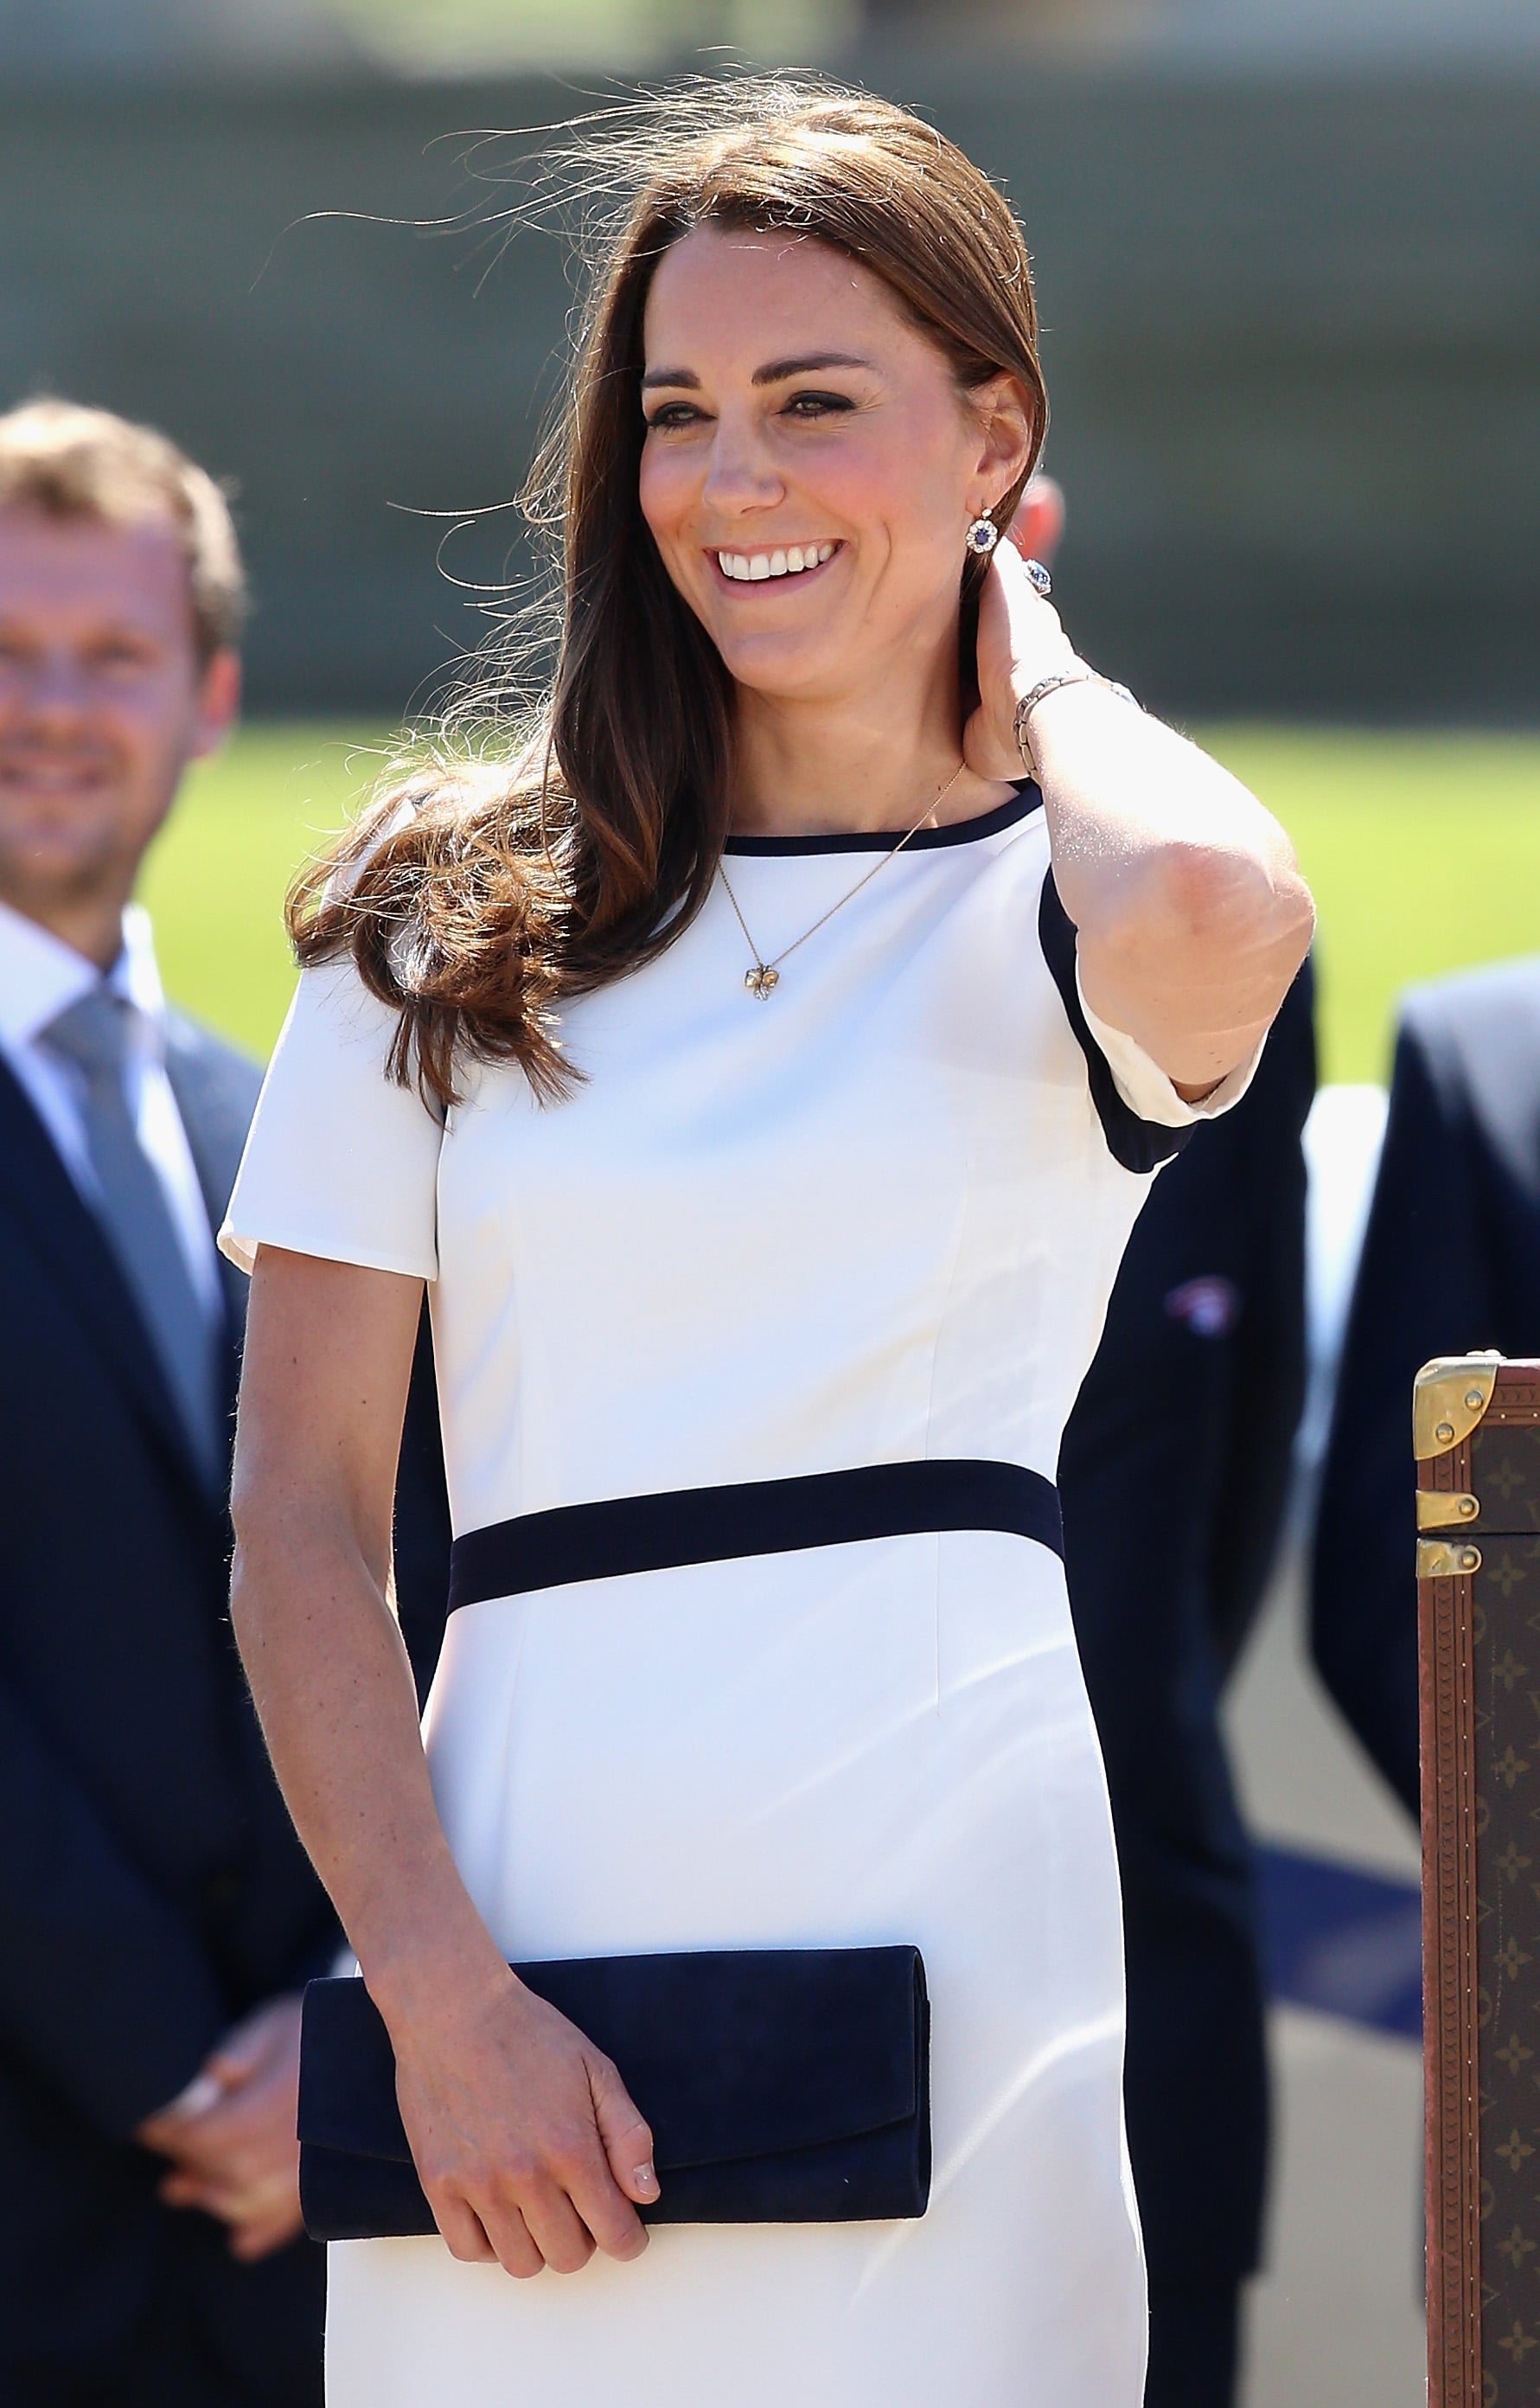 Kate's Jaeger Crepe Dress | 13 Times Kate Middleton Was a in White (Including in Her Royal Wedding Gown) | POPSUGAR Fashion Photo 14